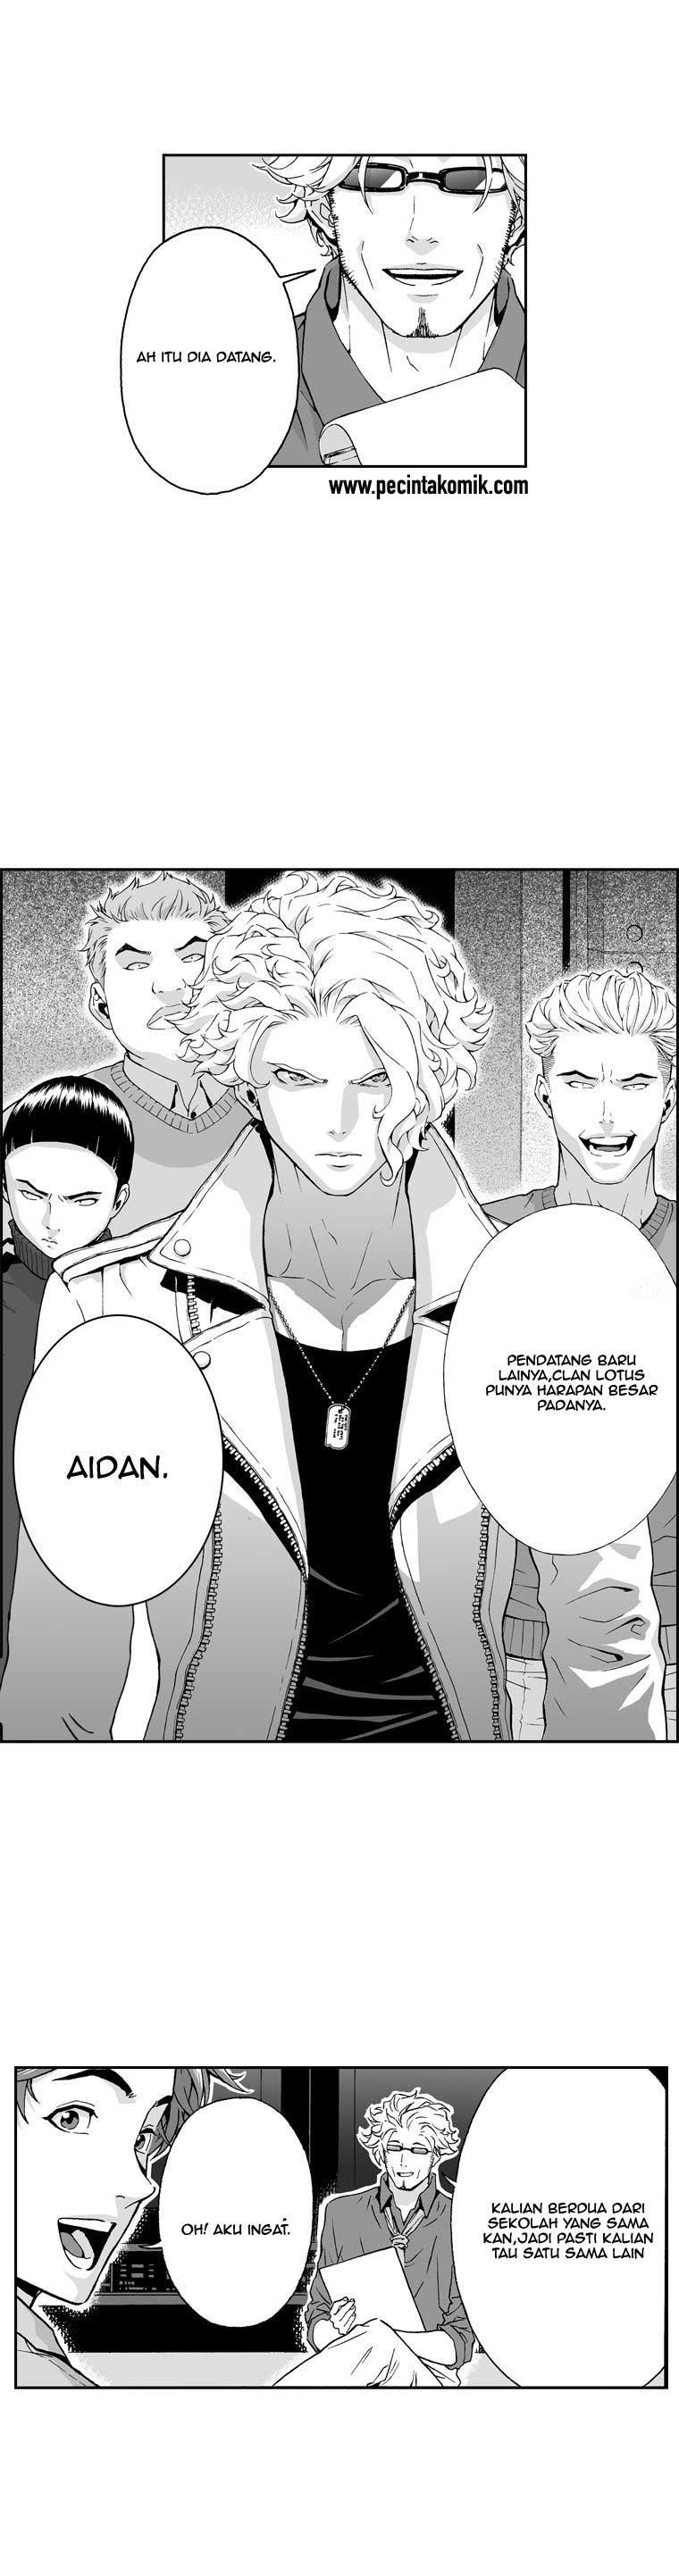 Action Idols – Age of Young Dragons Chapter 11